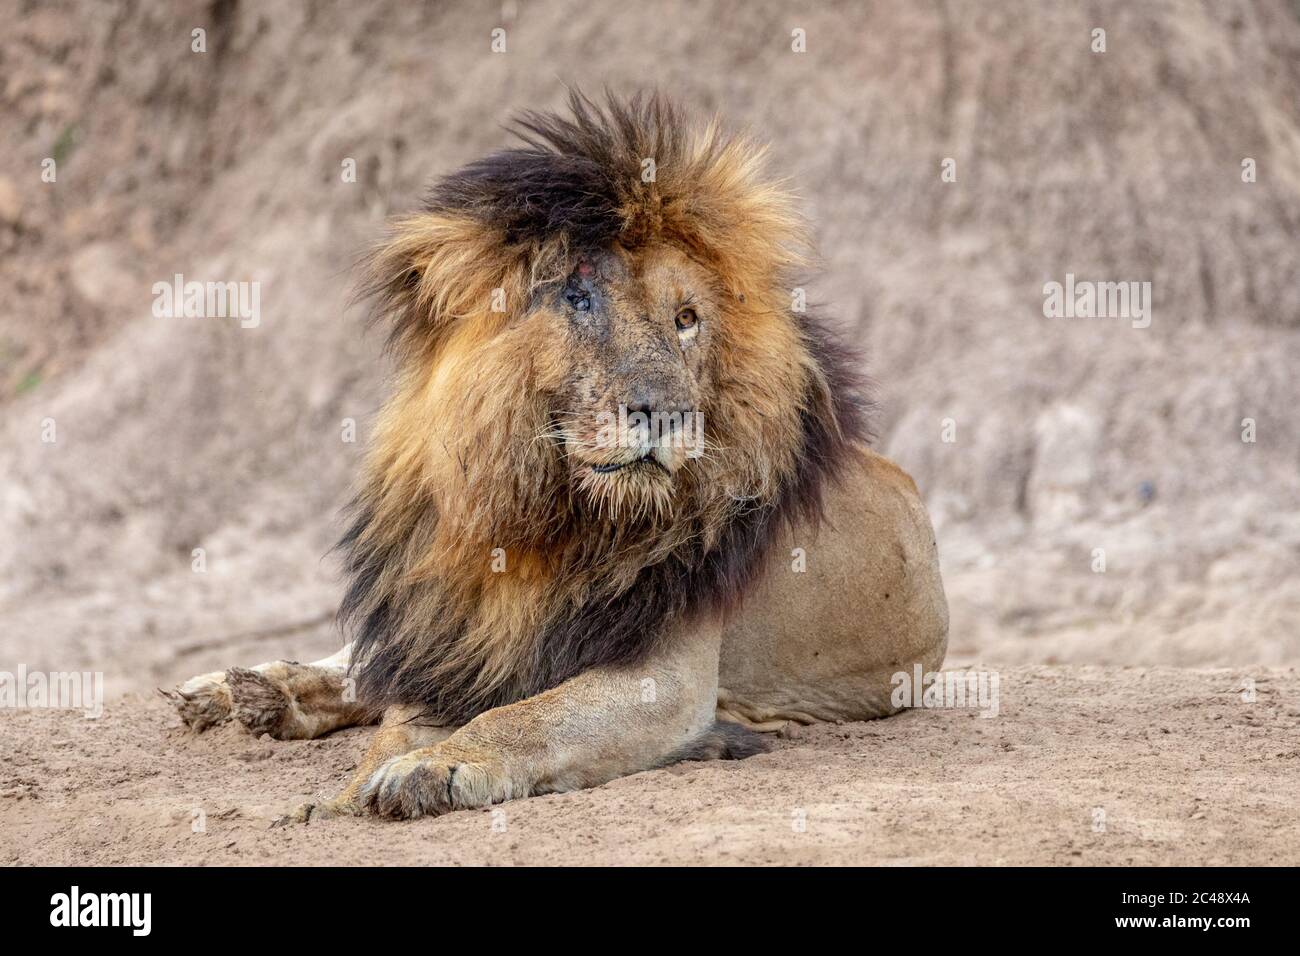 Male lion called Scar because of his damaged eye lying on sand by the Mara River in Masai Mara Kenya Stock Photo